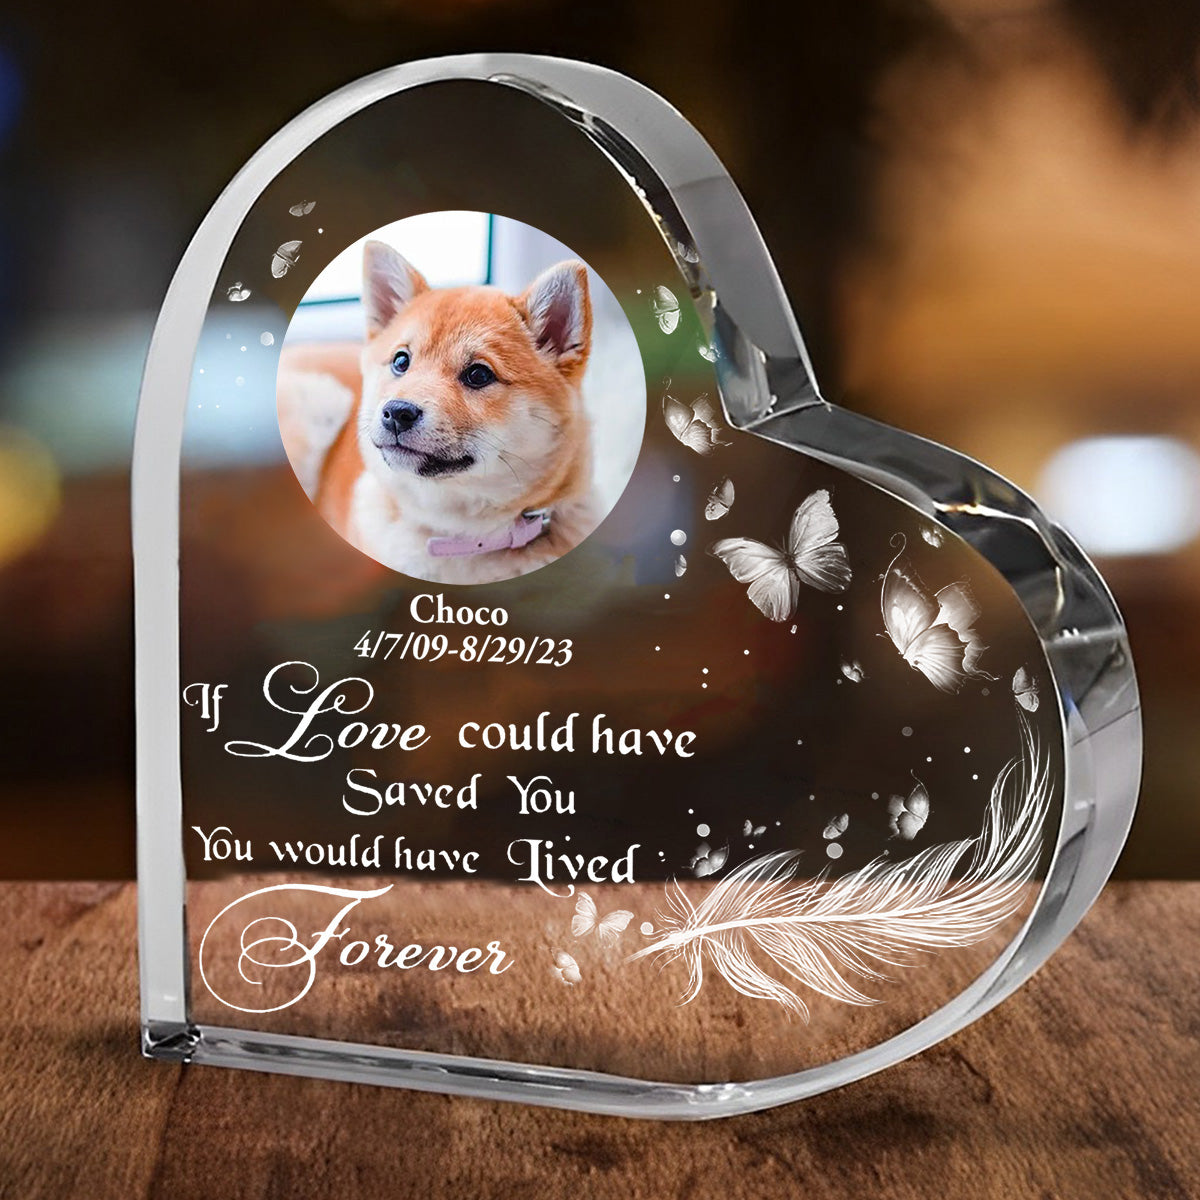 If Love Could Have Saved You, You Would Have Lived Forever Photo Crystal Heart Acrylic Blocks - Memorial Gifts for Pet Lovers - Pet Loss Gifts